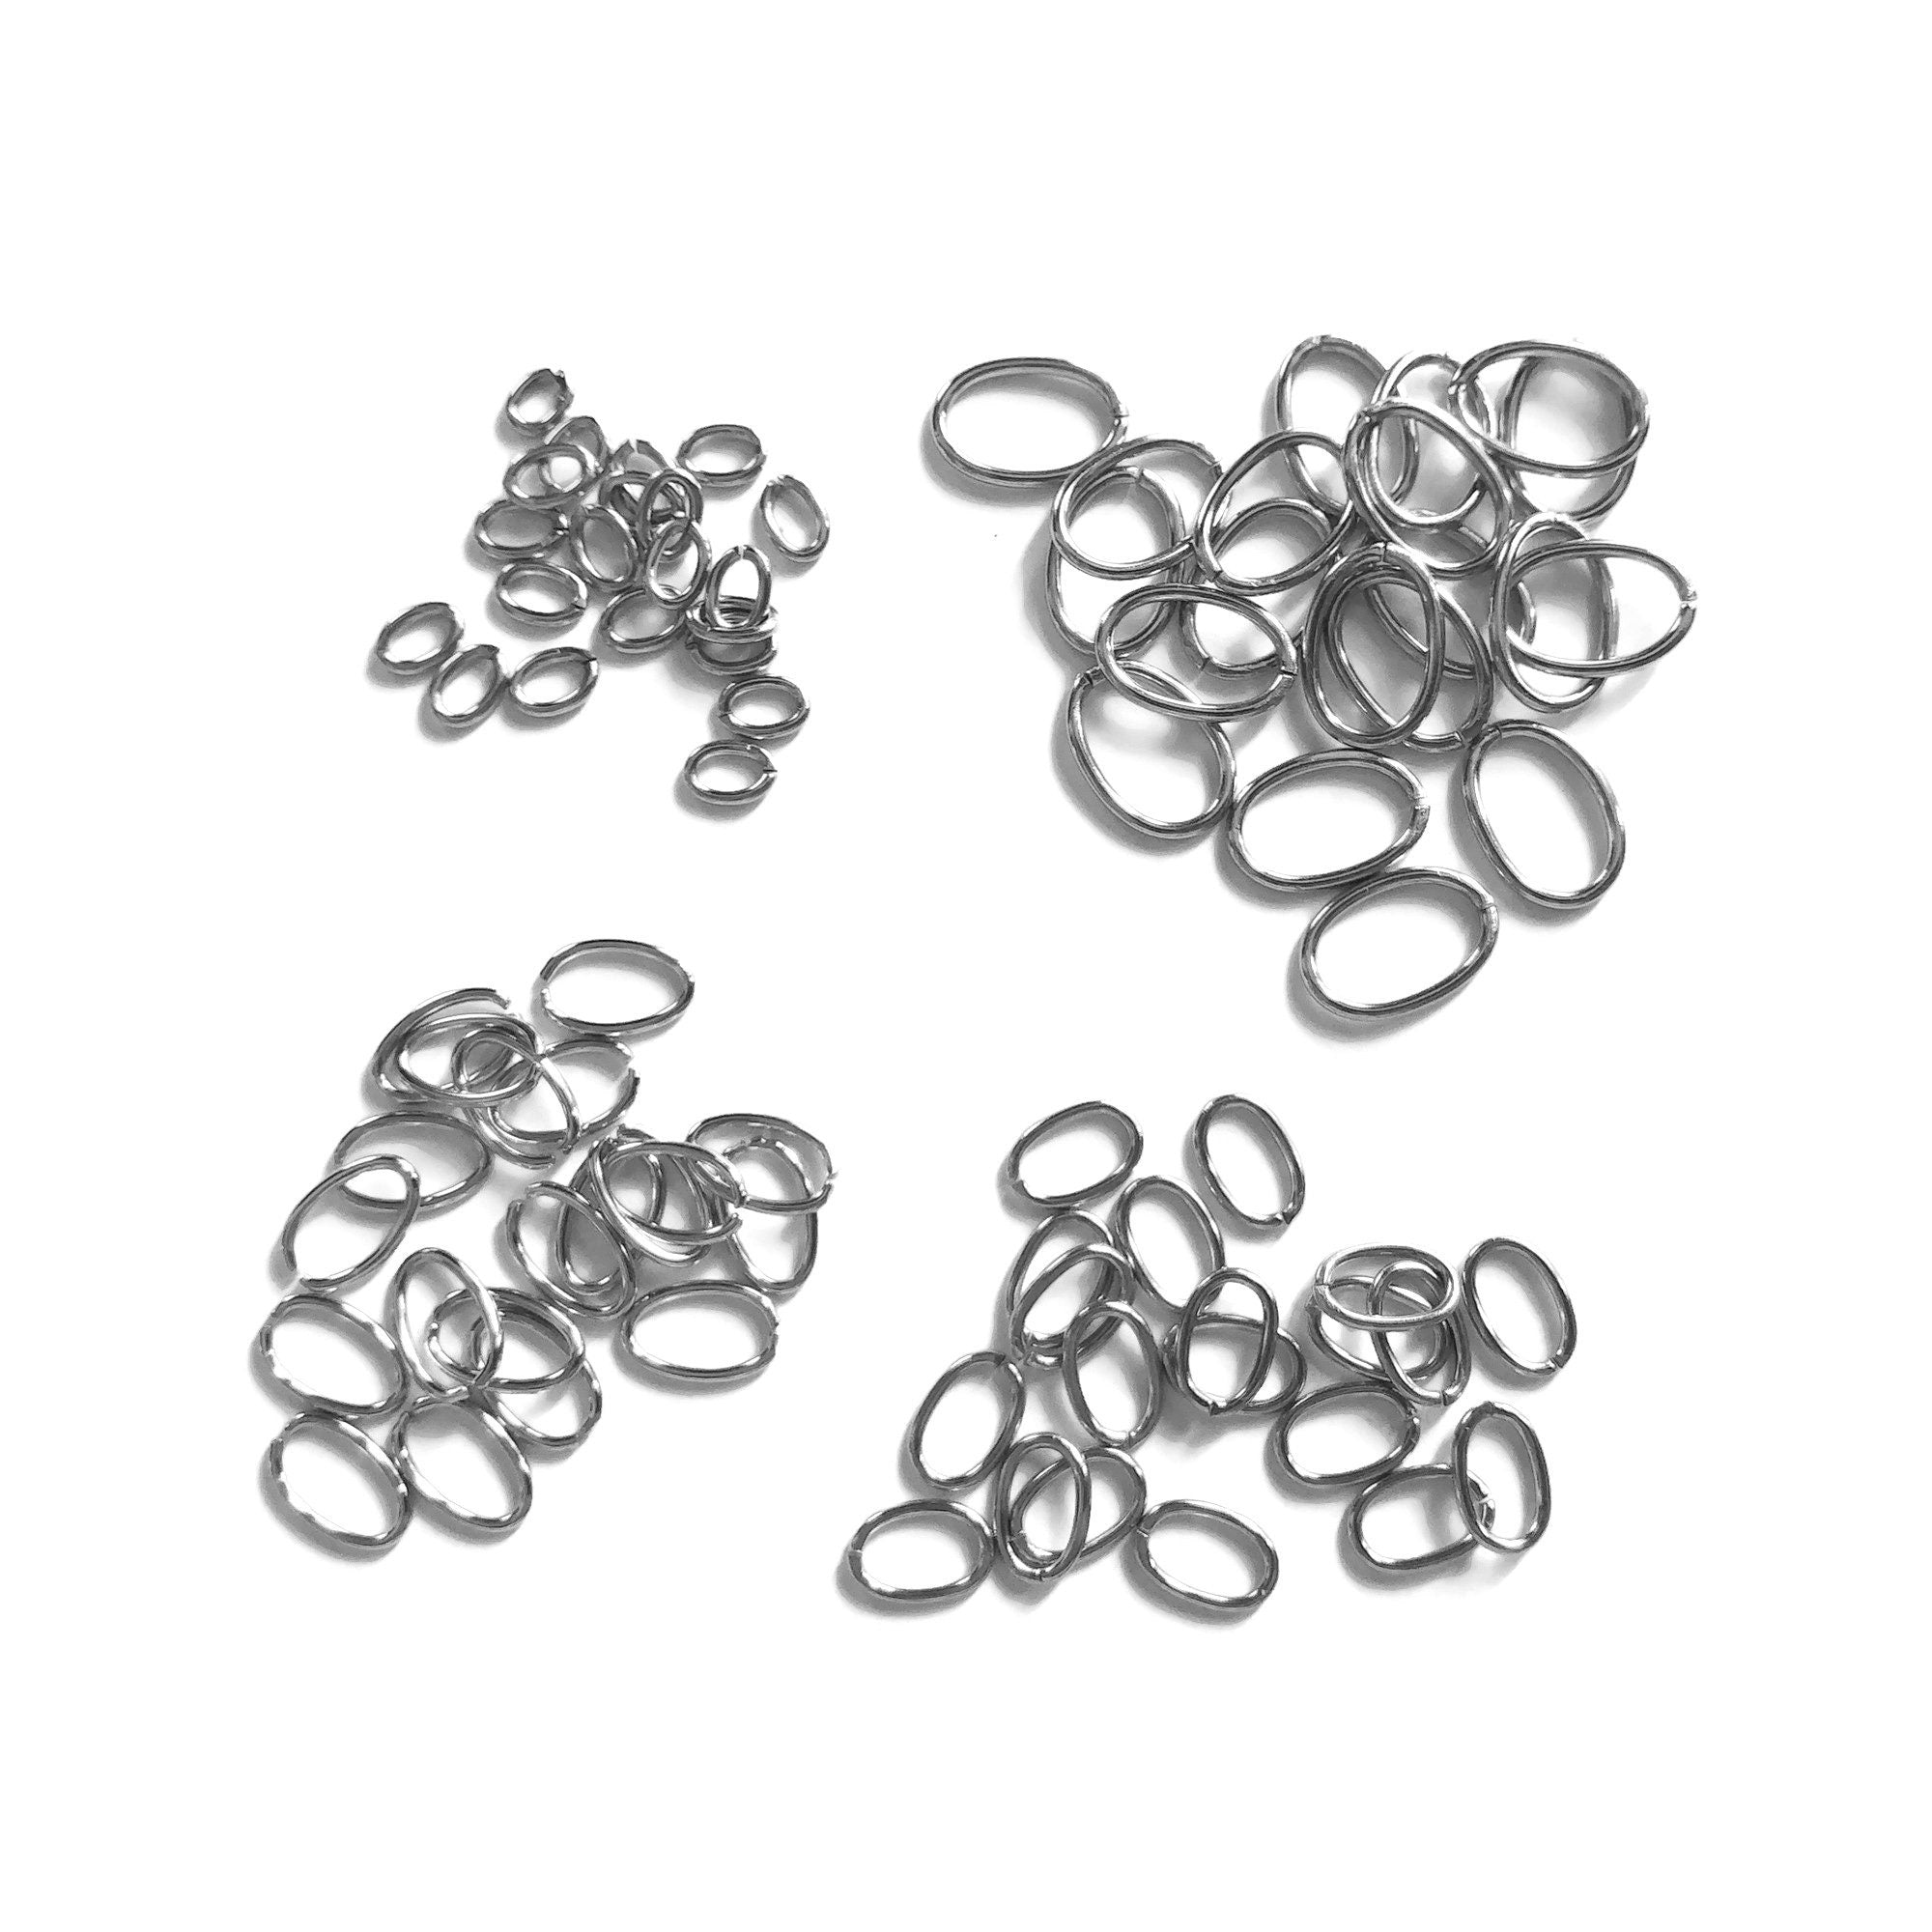 20 Stainless steel oval jump rings, Hypoallergenic silver jump ring, 6, 9, 10 or 13mm, Jewelry findings